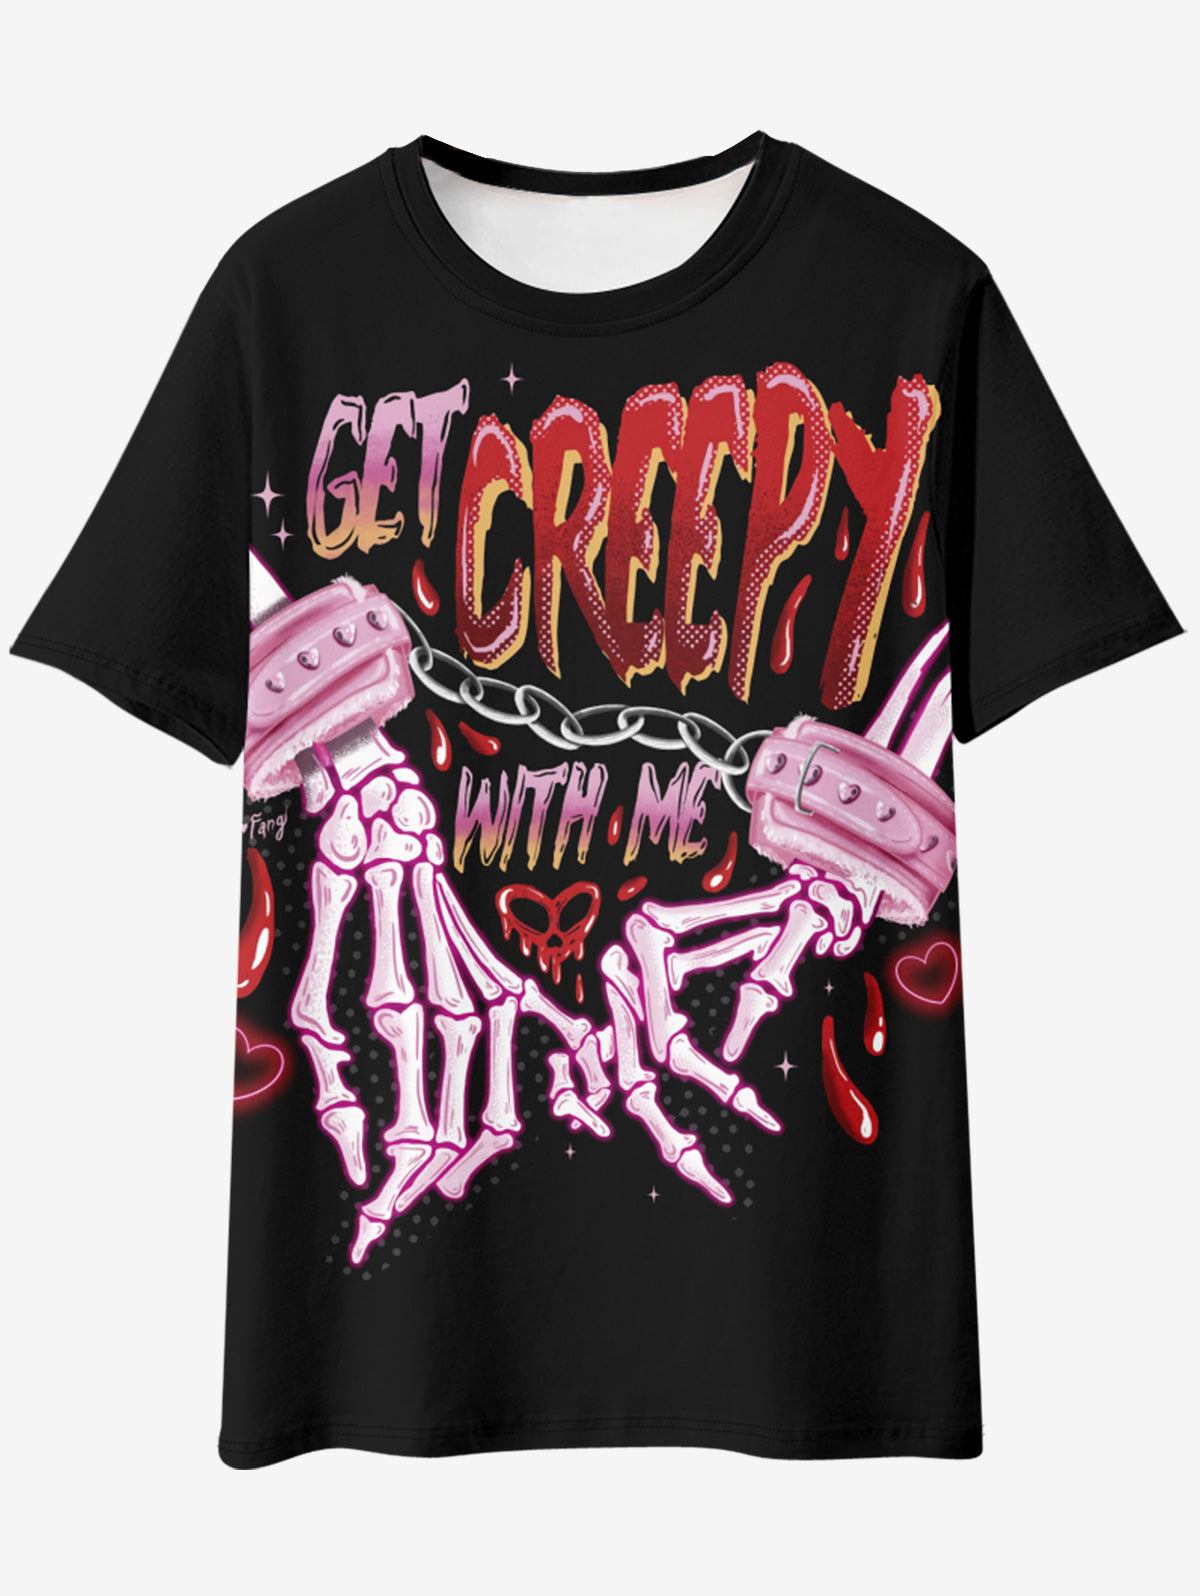 💗Tabbytragedy Loves💗 Gothic Graphic Tee